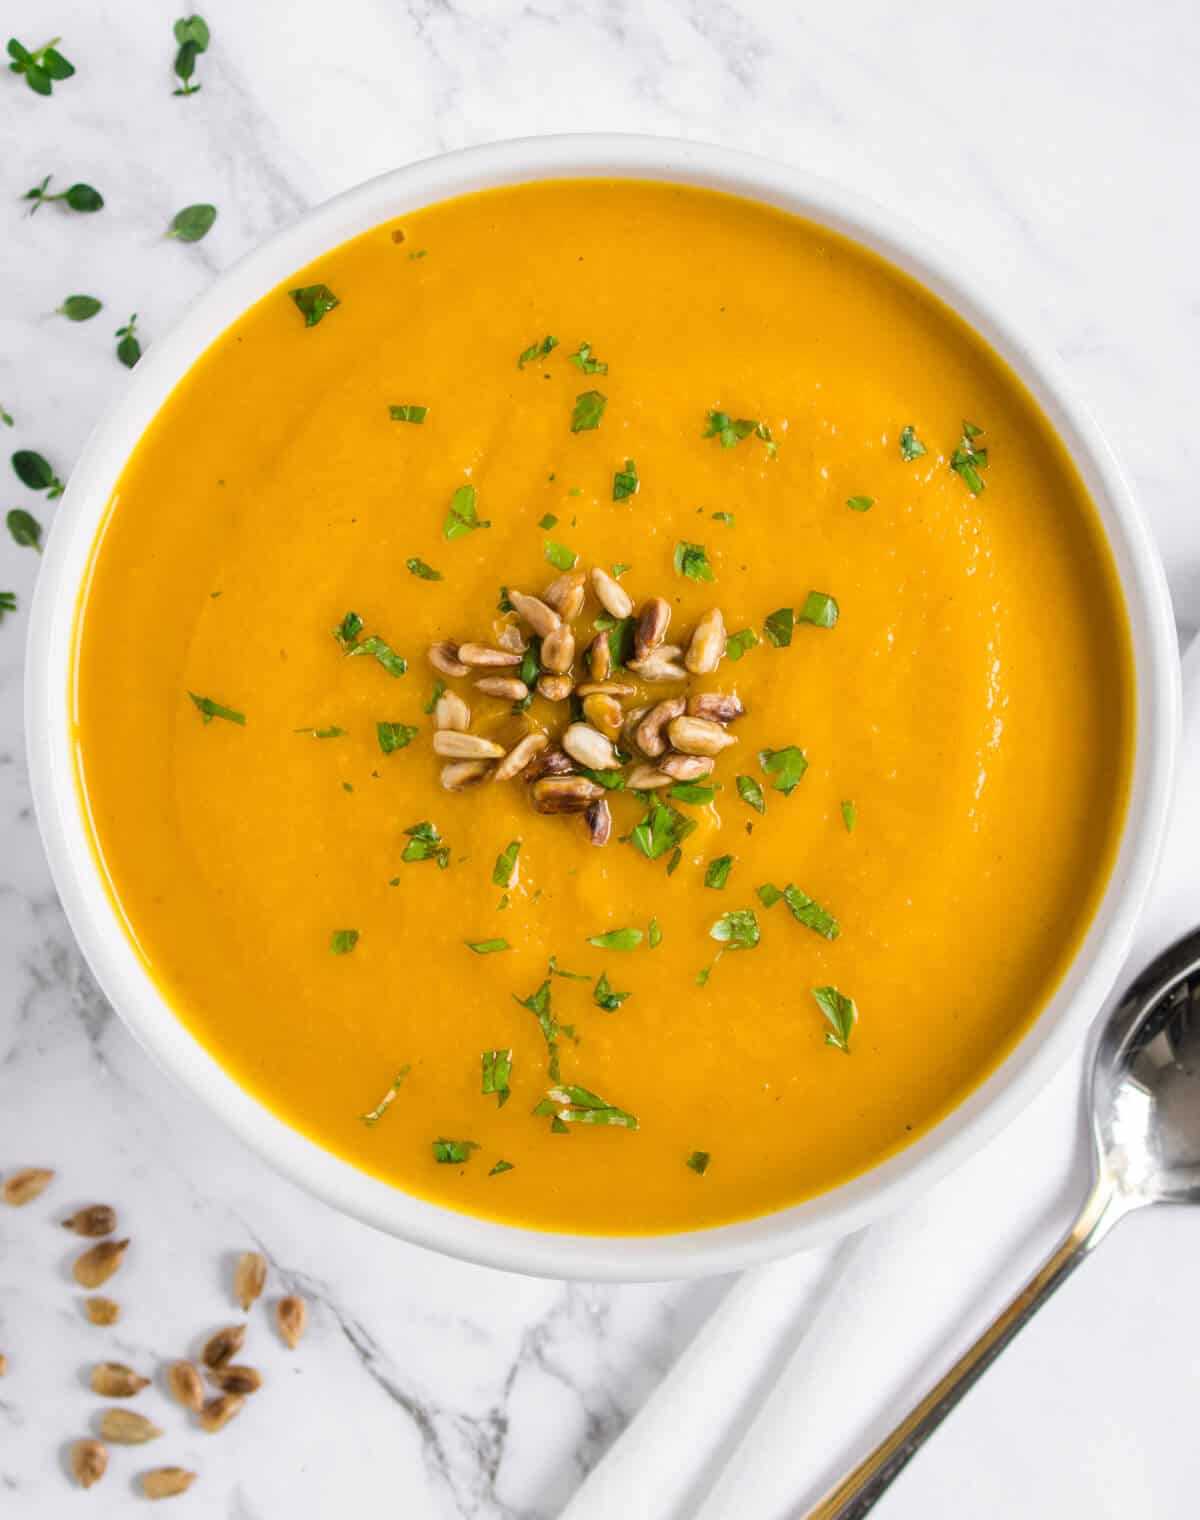 Pumpkin soup topped with toasted sunflower seeds and parsley